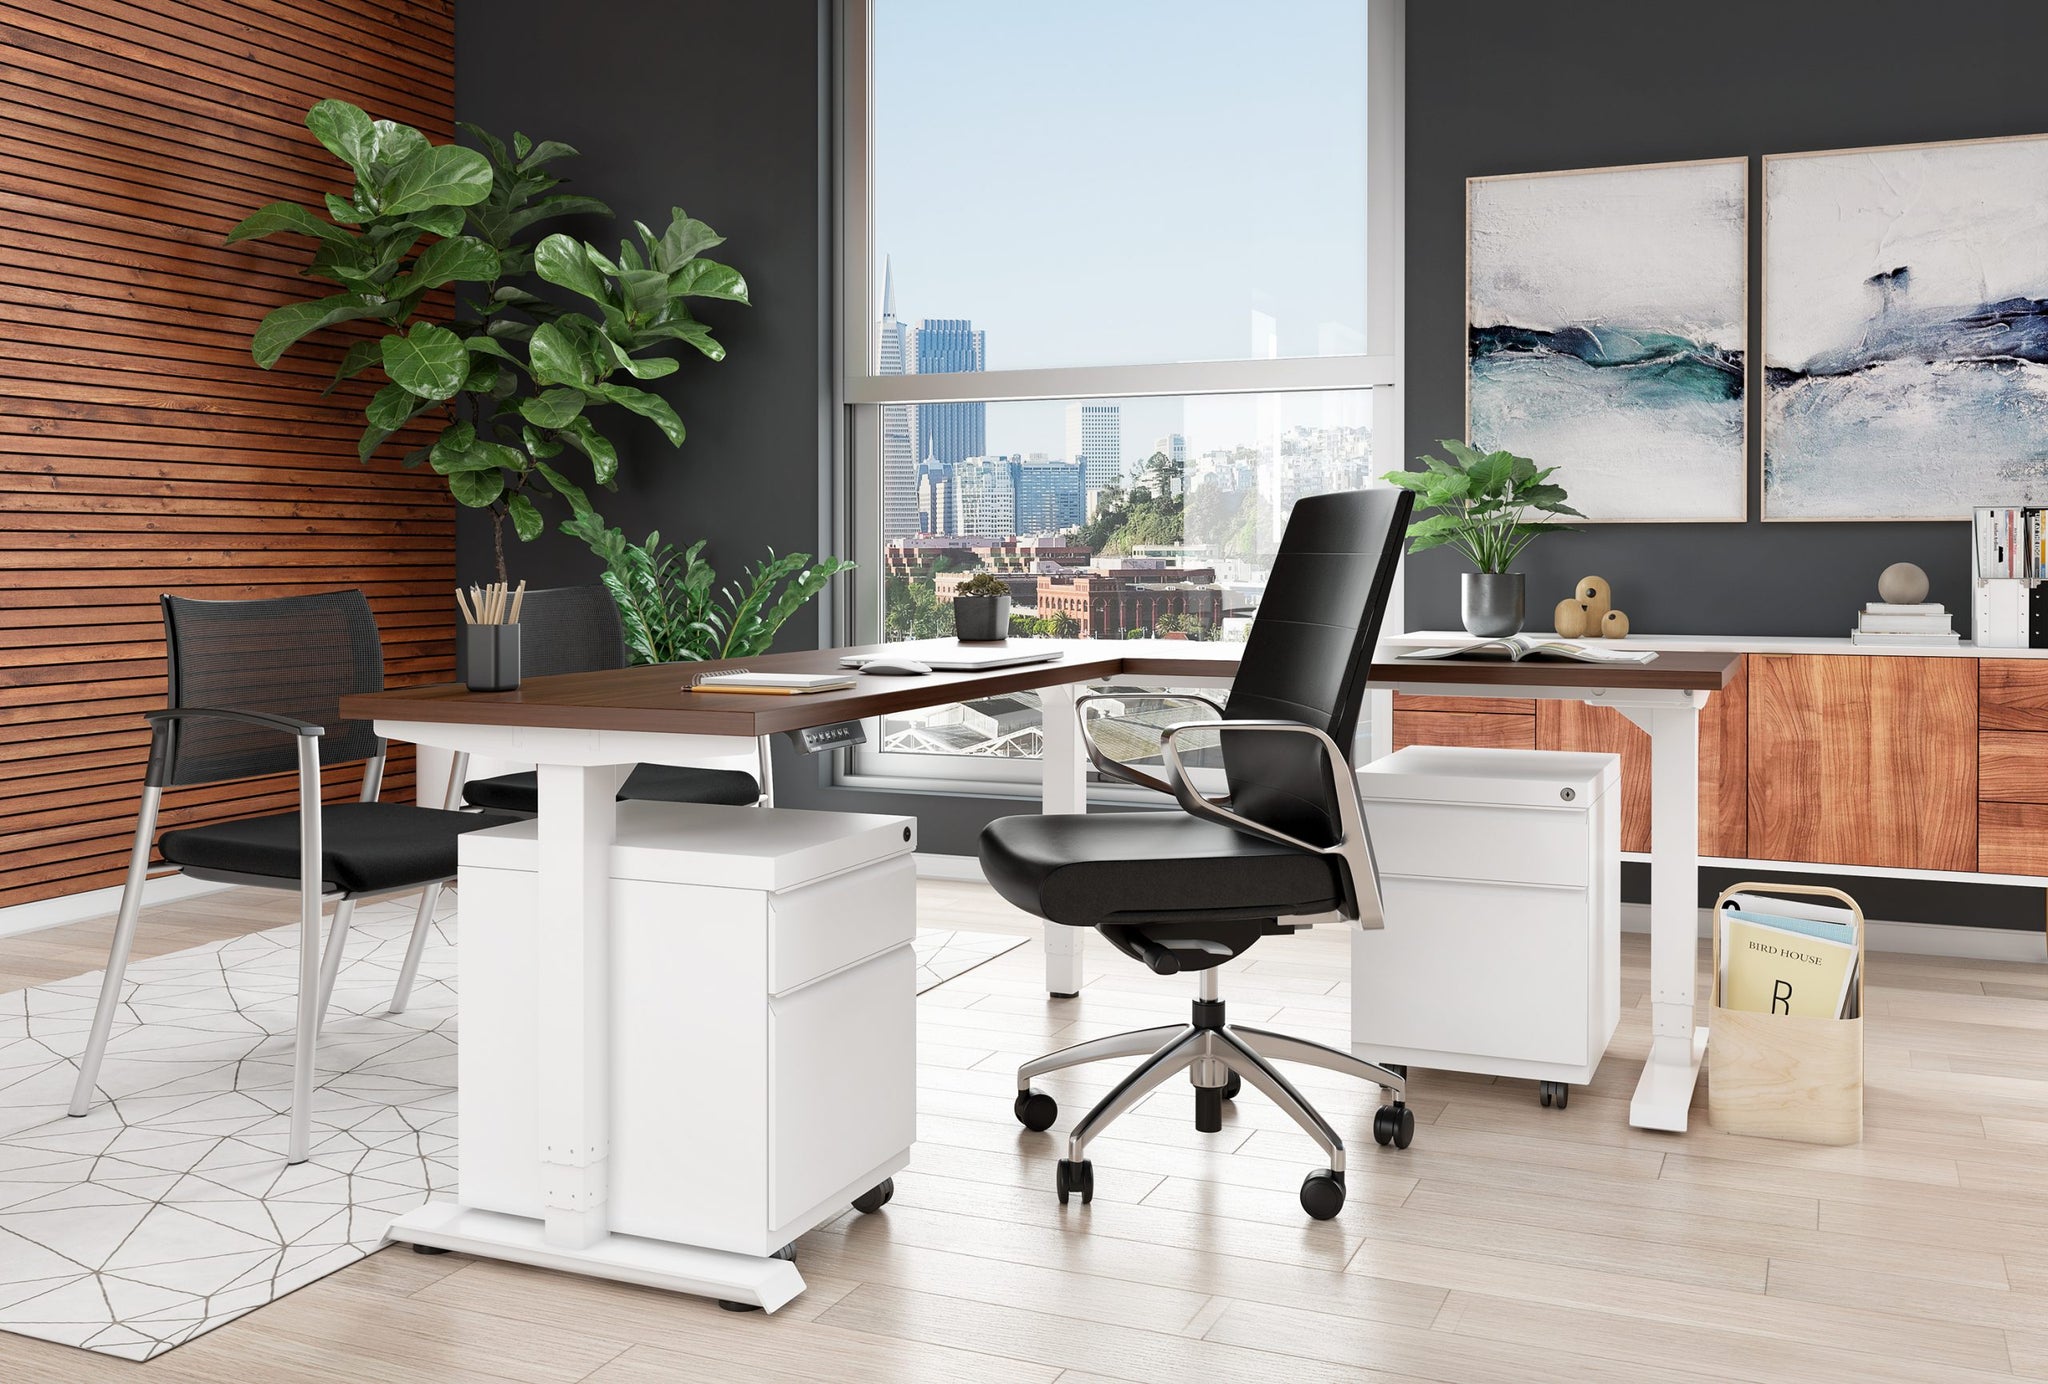 Stand SteadyTranzendeskPower | Extra Large 71 inch Electric L-Shaped Standing Desk | Giant Corner Stand Up Desk & Sit Stand Workstation | Ergonomic